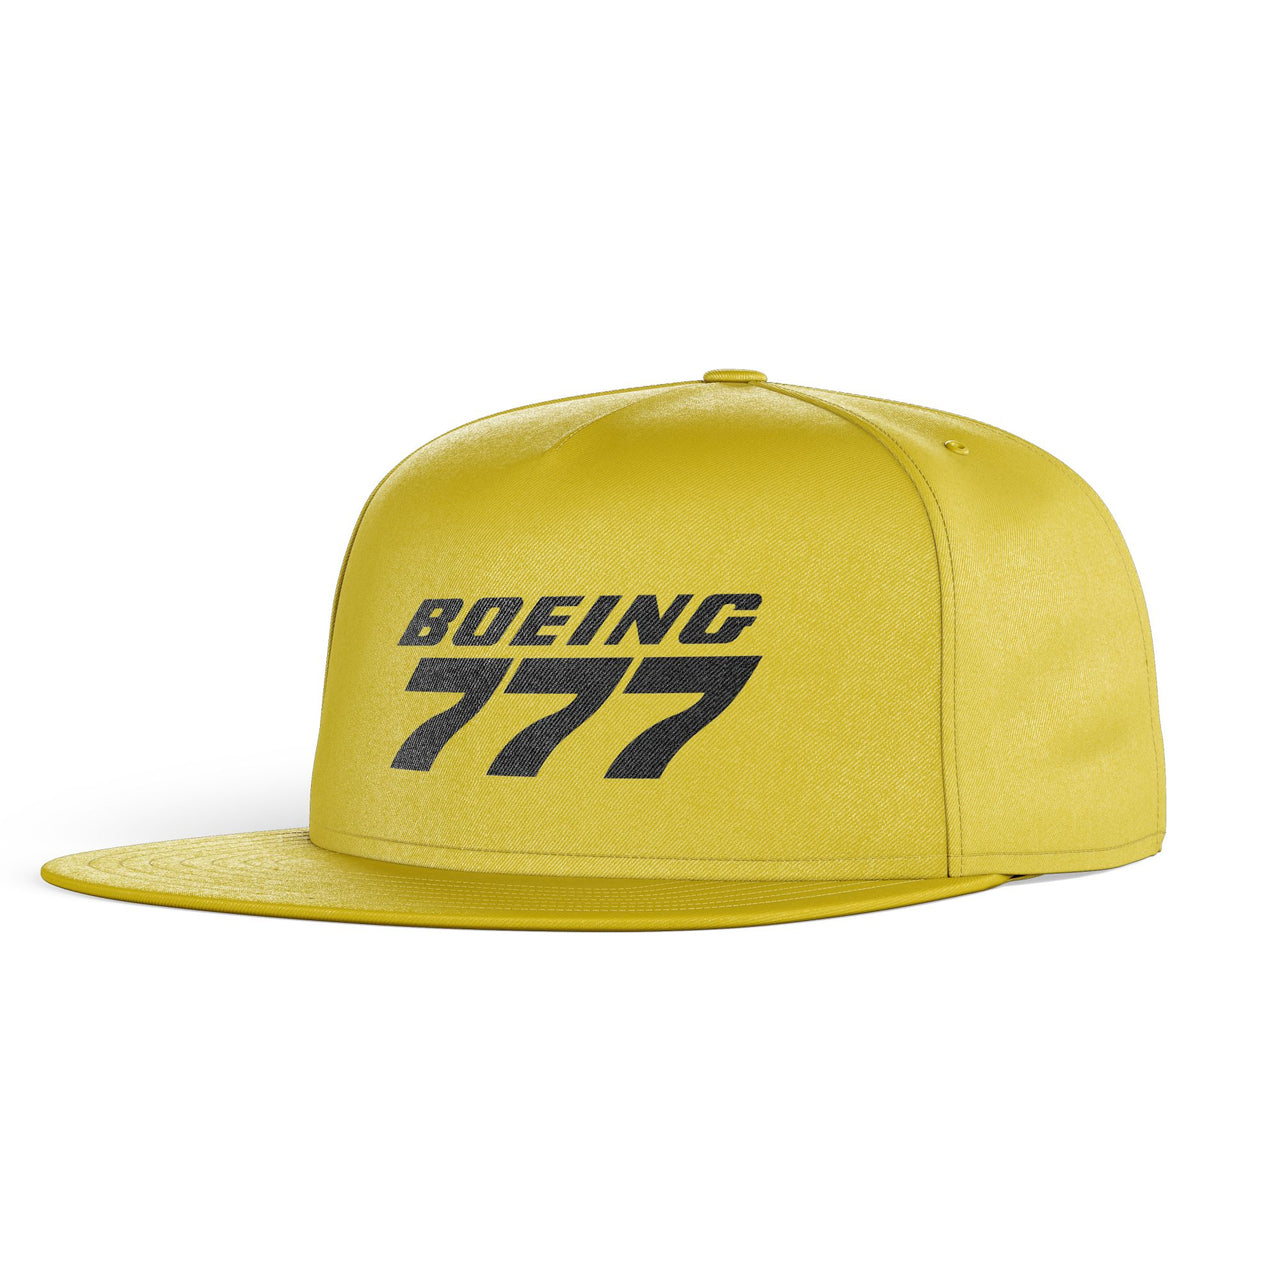 Boeing 777 & Text Designed Snapback Caps & Hats